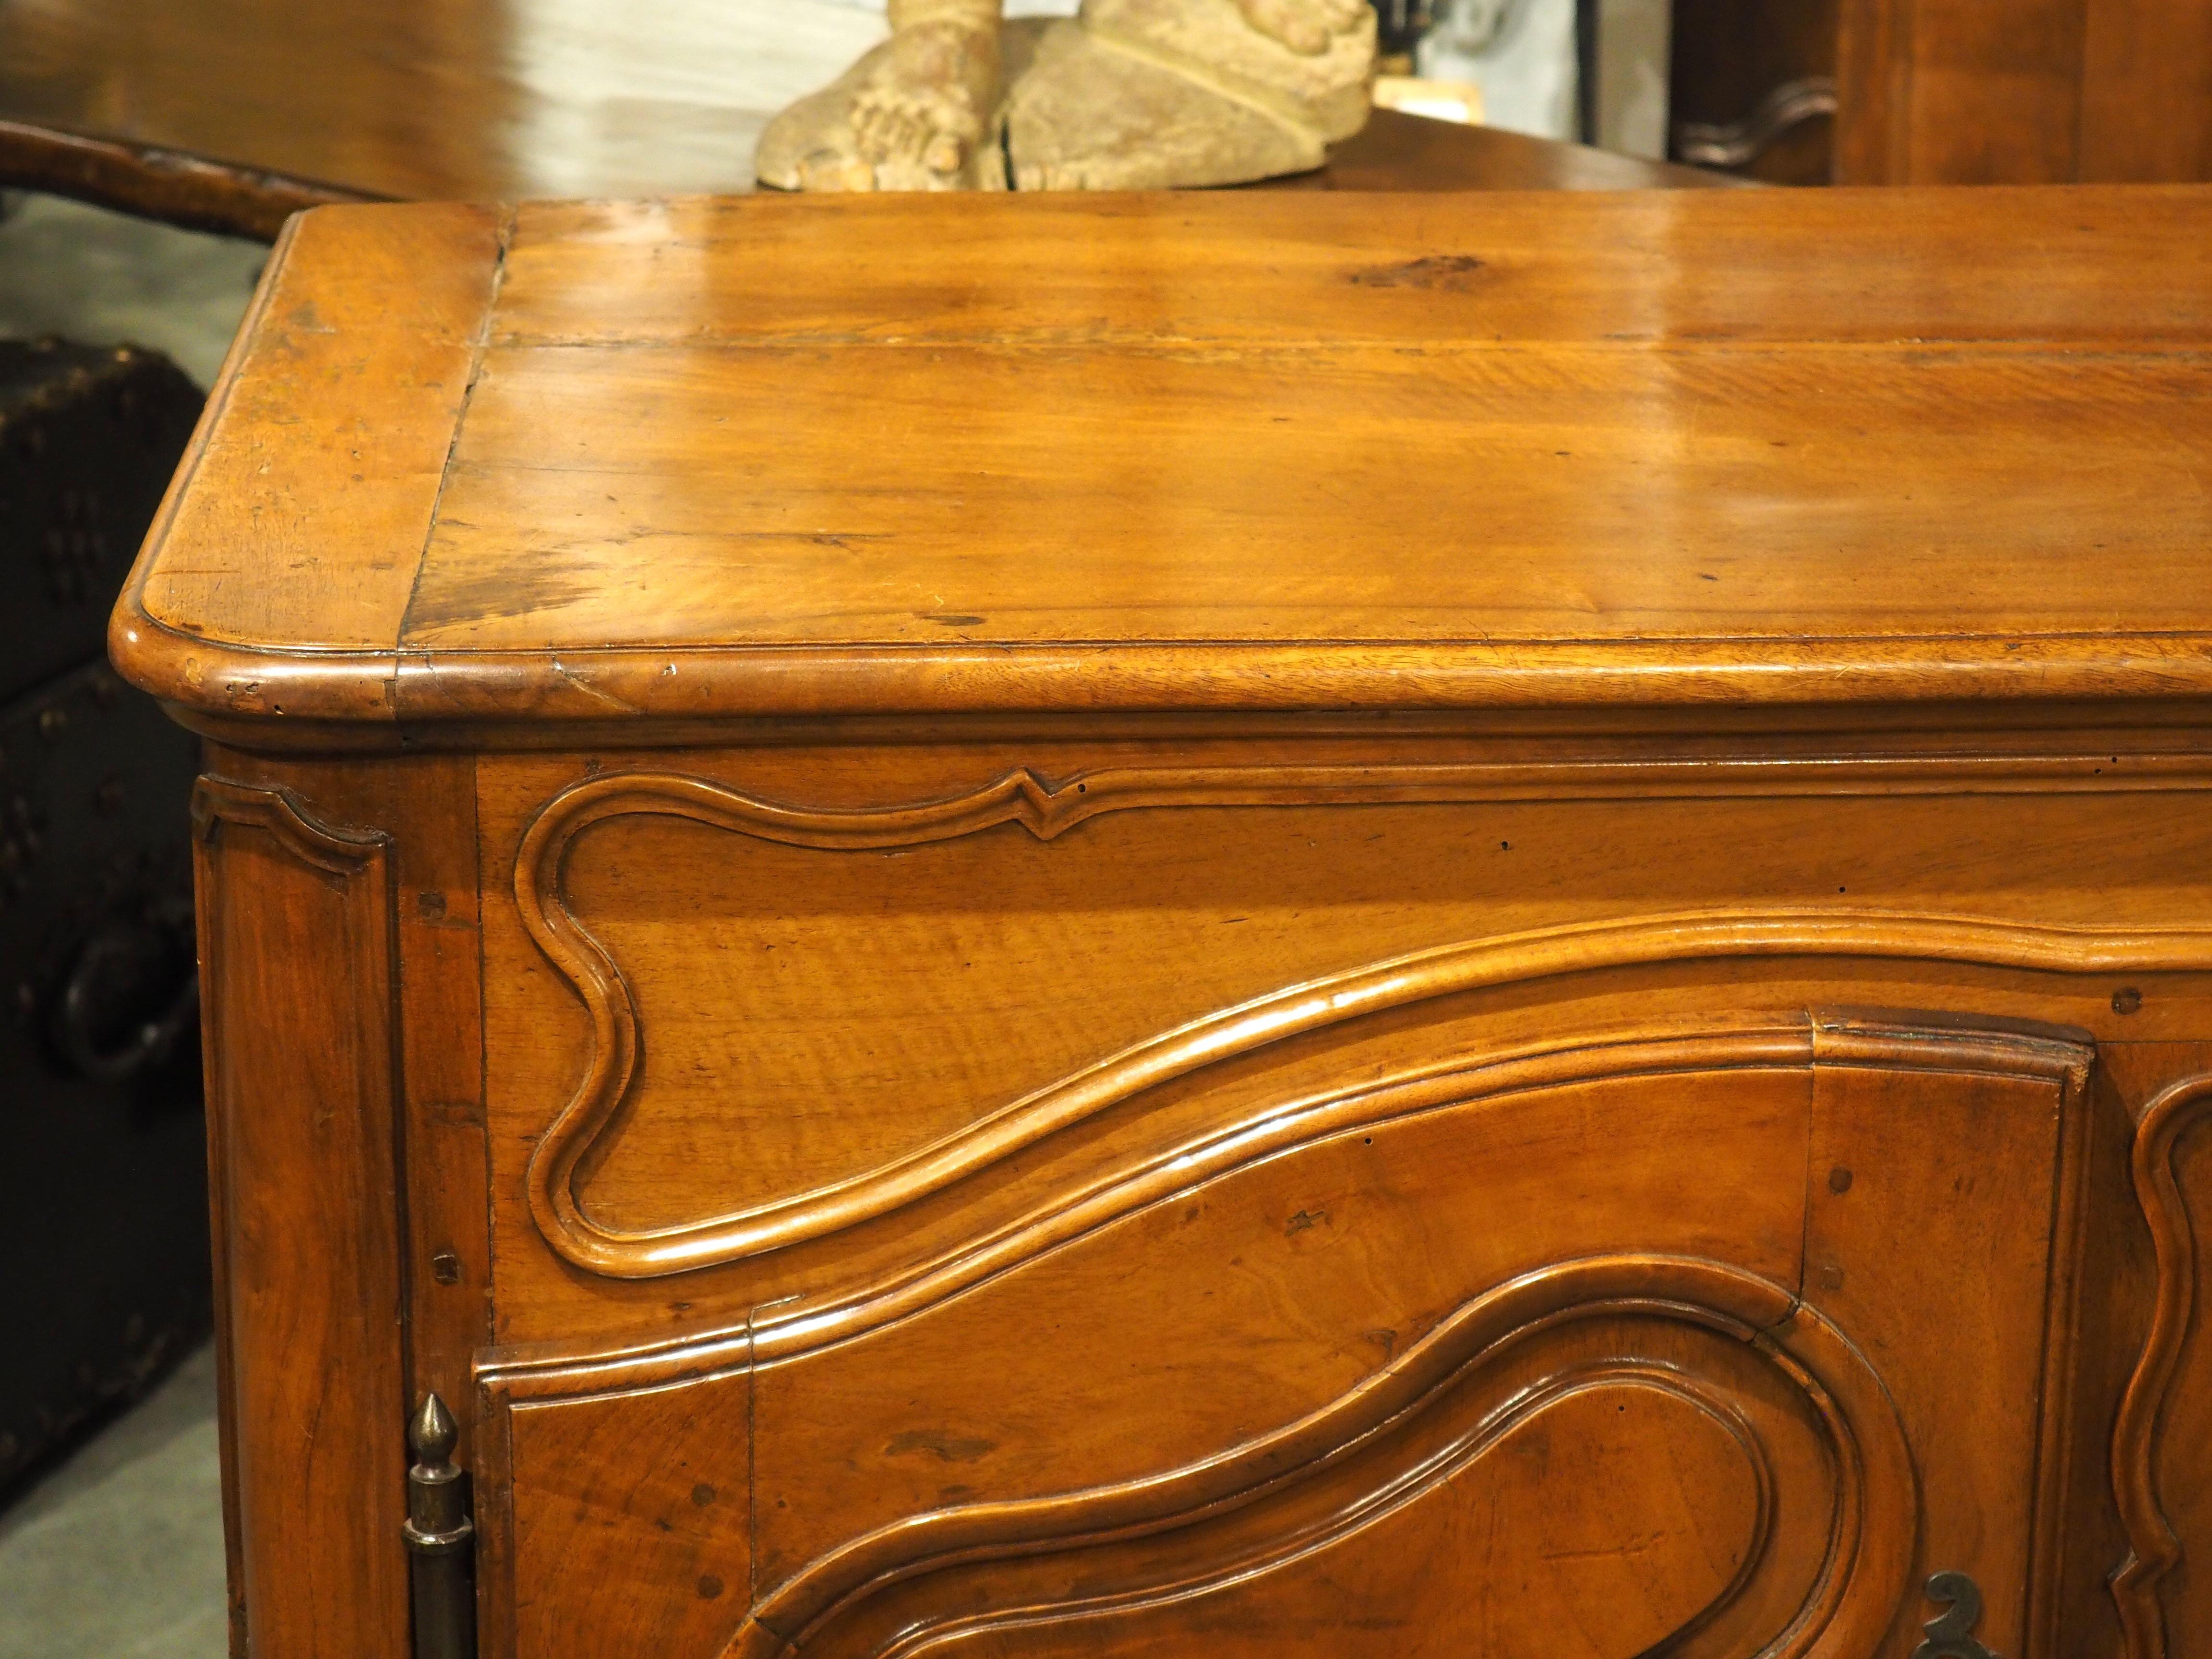 French Circa 1750 Carved Walnut Wood Buffet Crédence from Nîmes, France